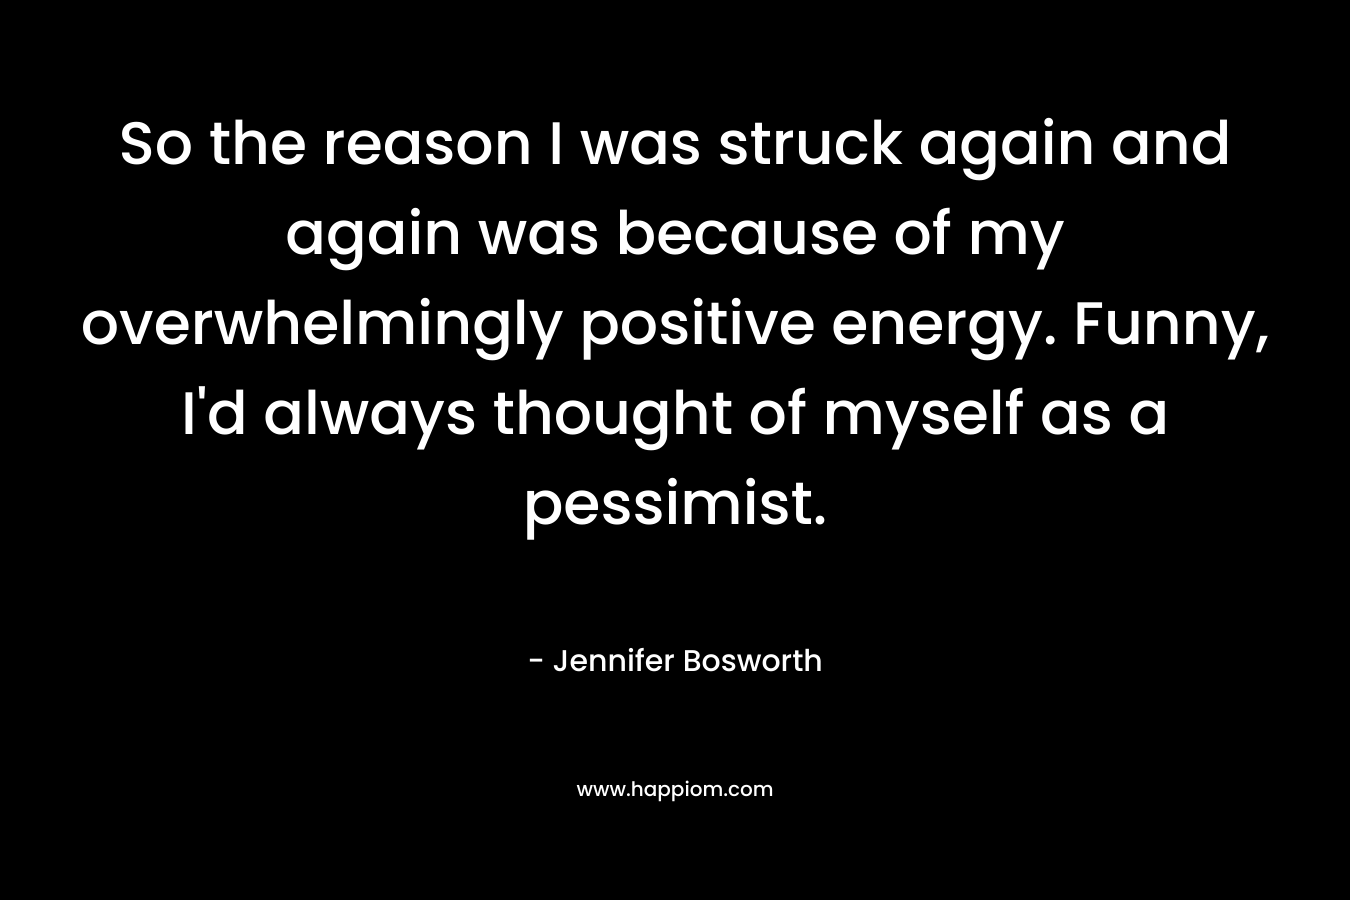 So the reason I was struck again and again was because of my overwhelmingly positive energy. Funny, I’d always thought of myself as a pessimist. – Jennifer Bosworth